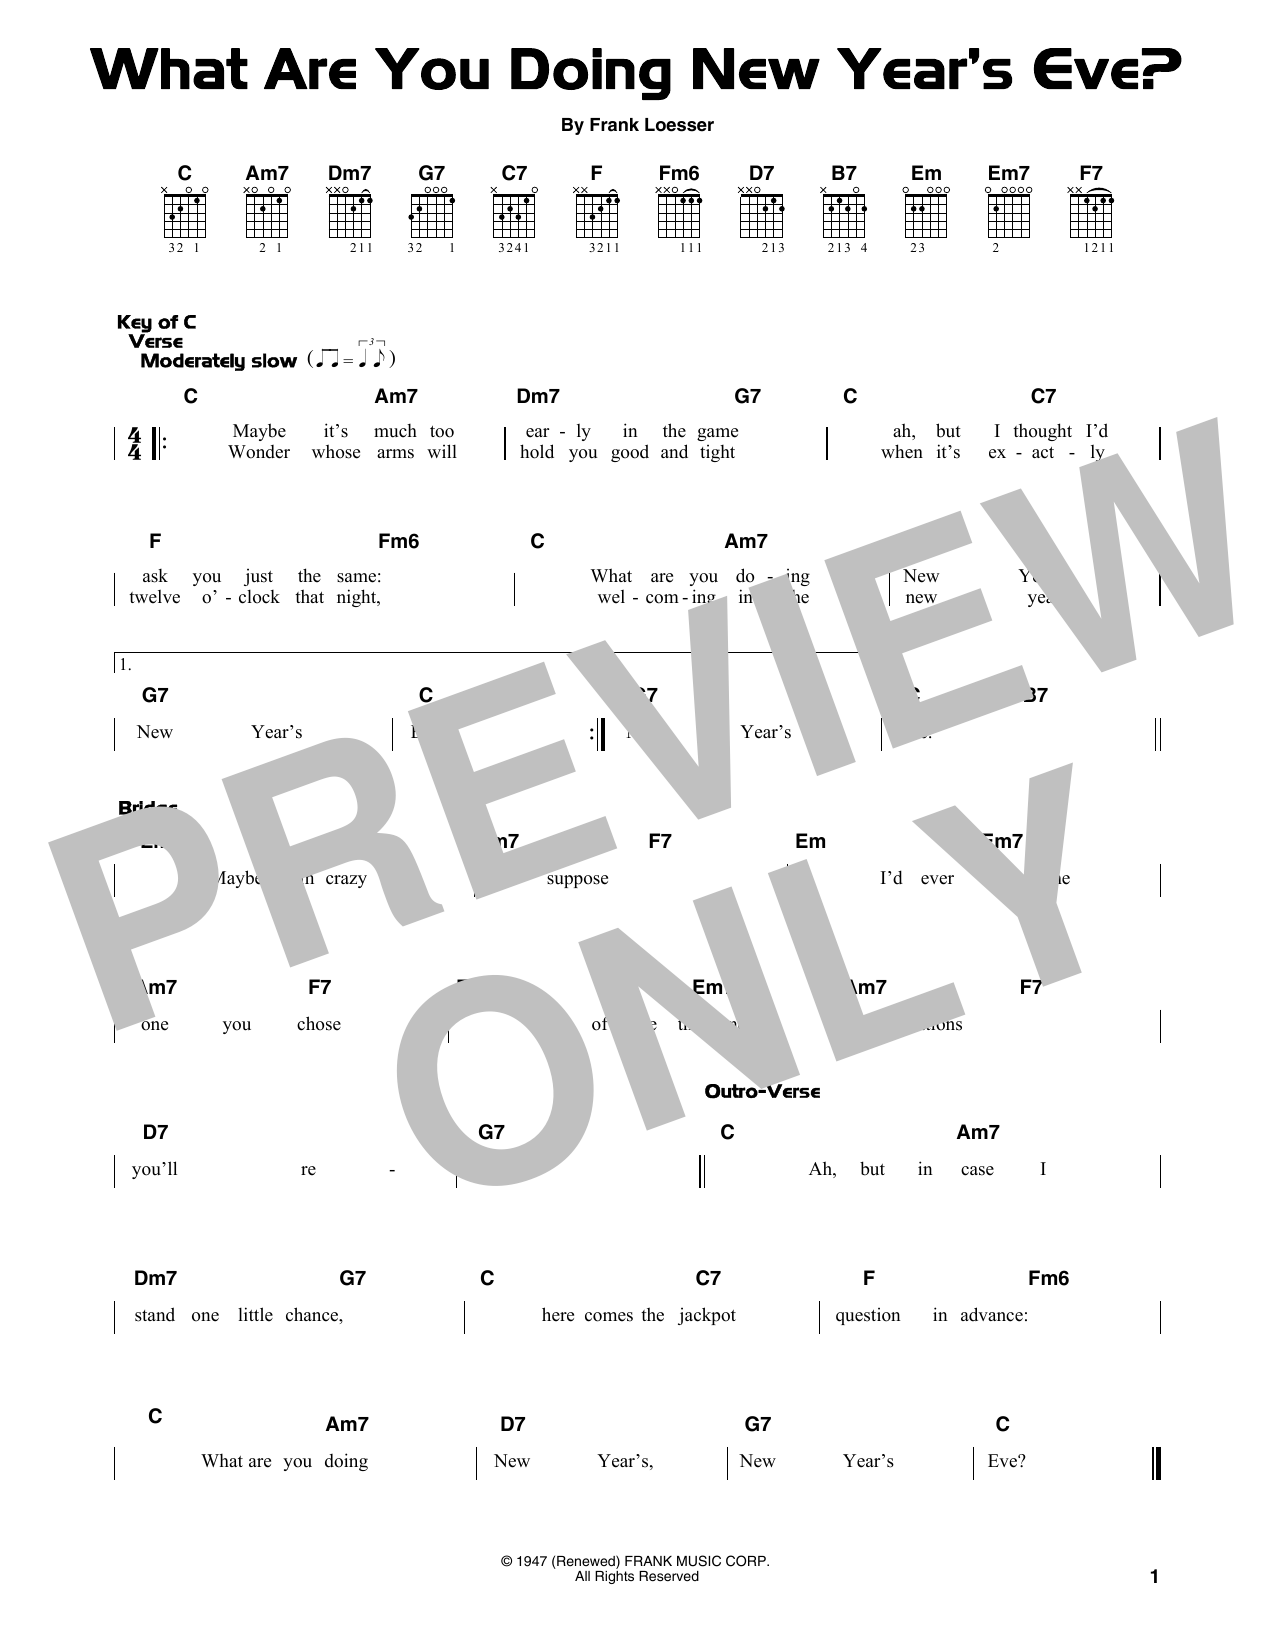 Download Frank Loesser What Are You Doing New Year's Eve? Sheet Music